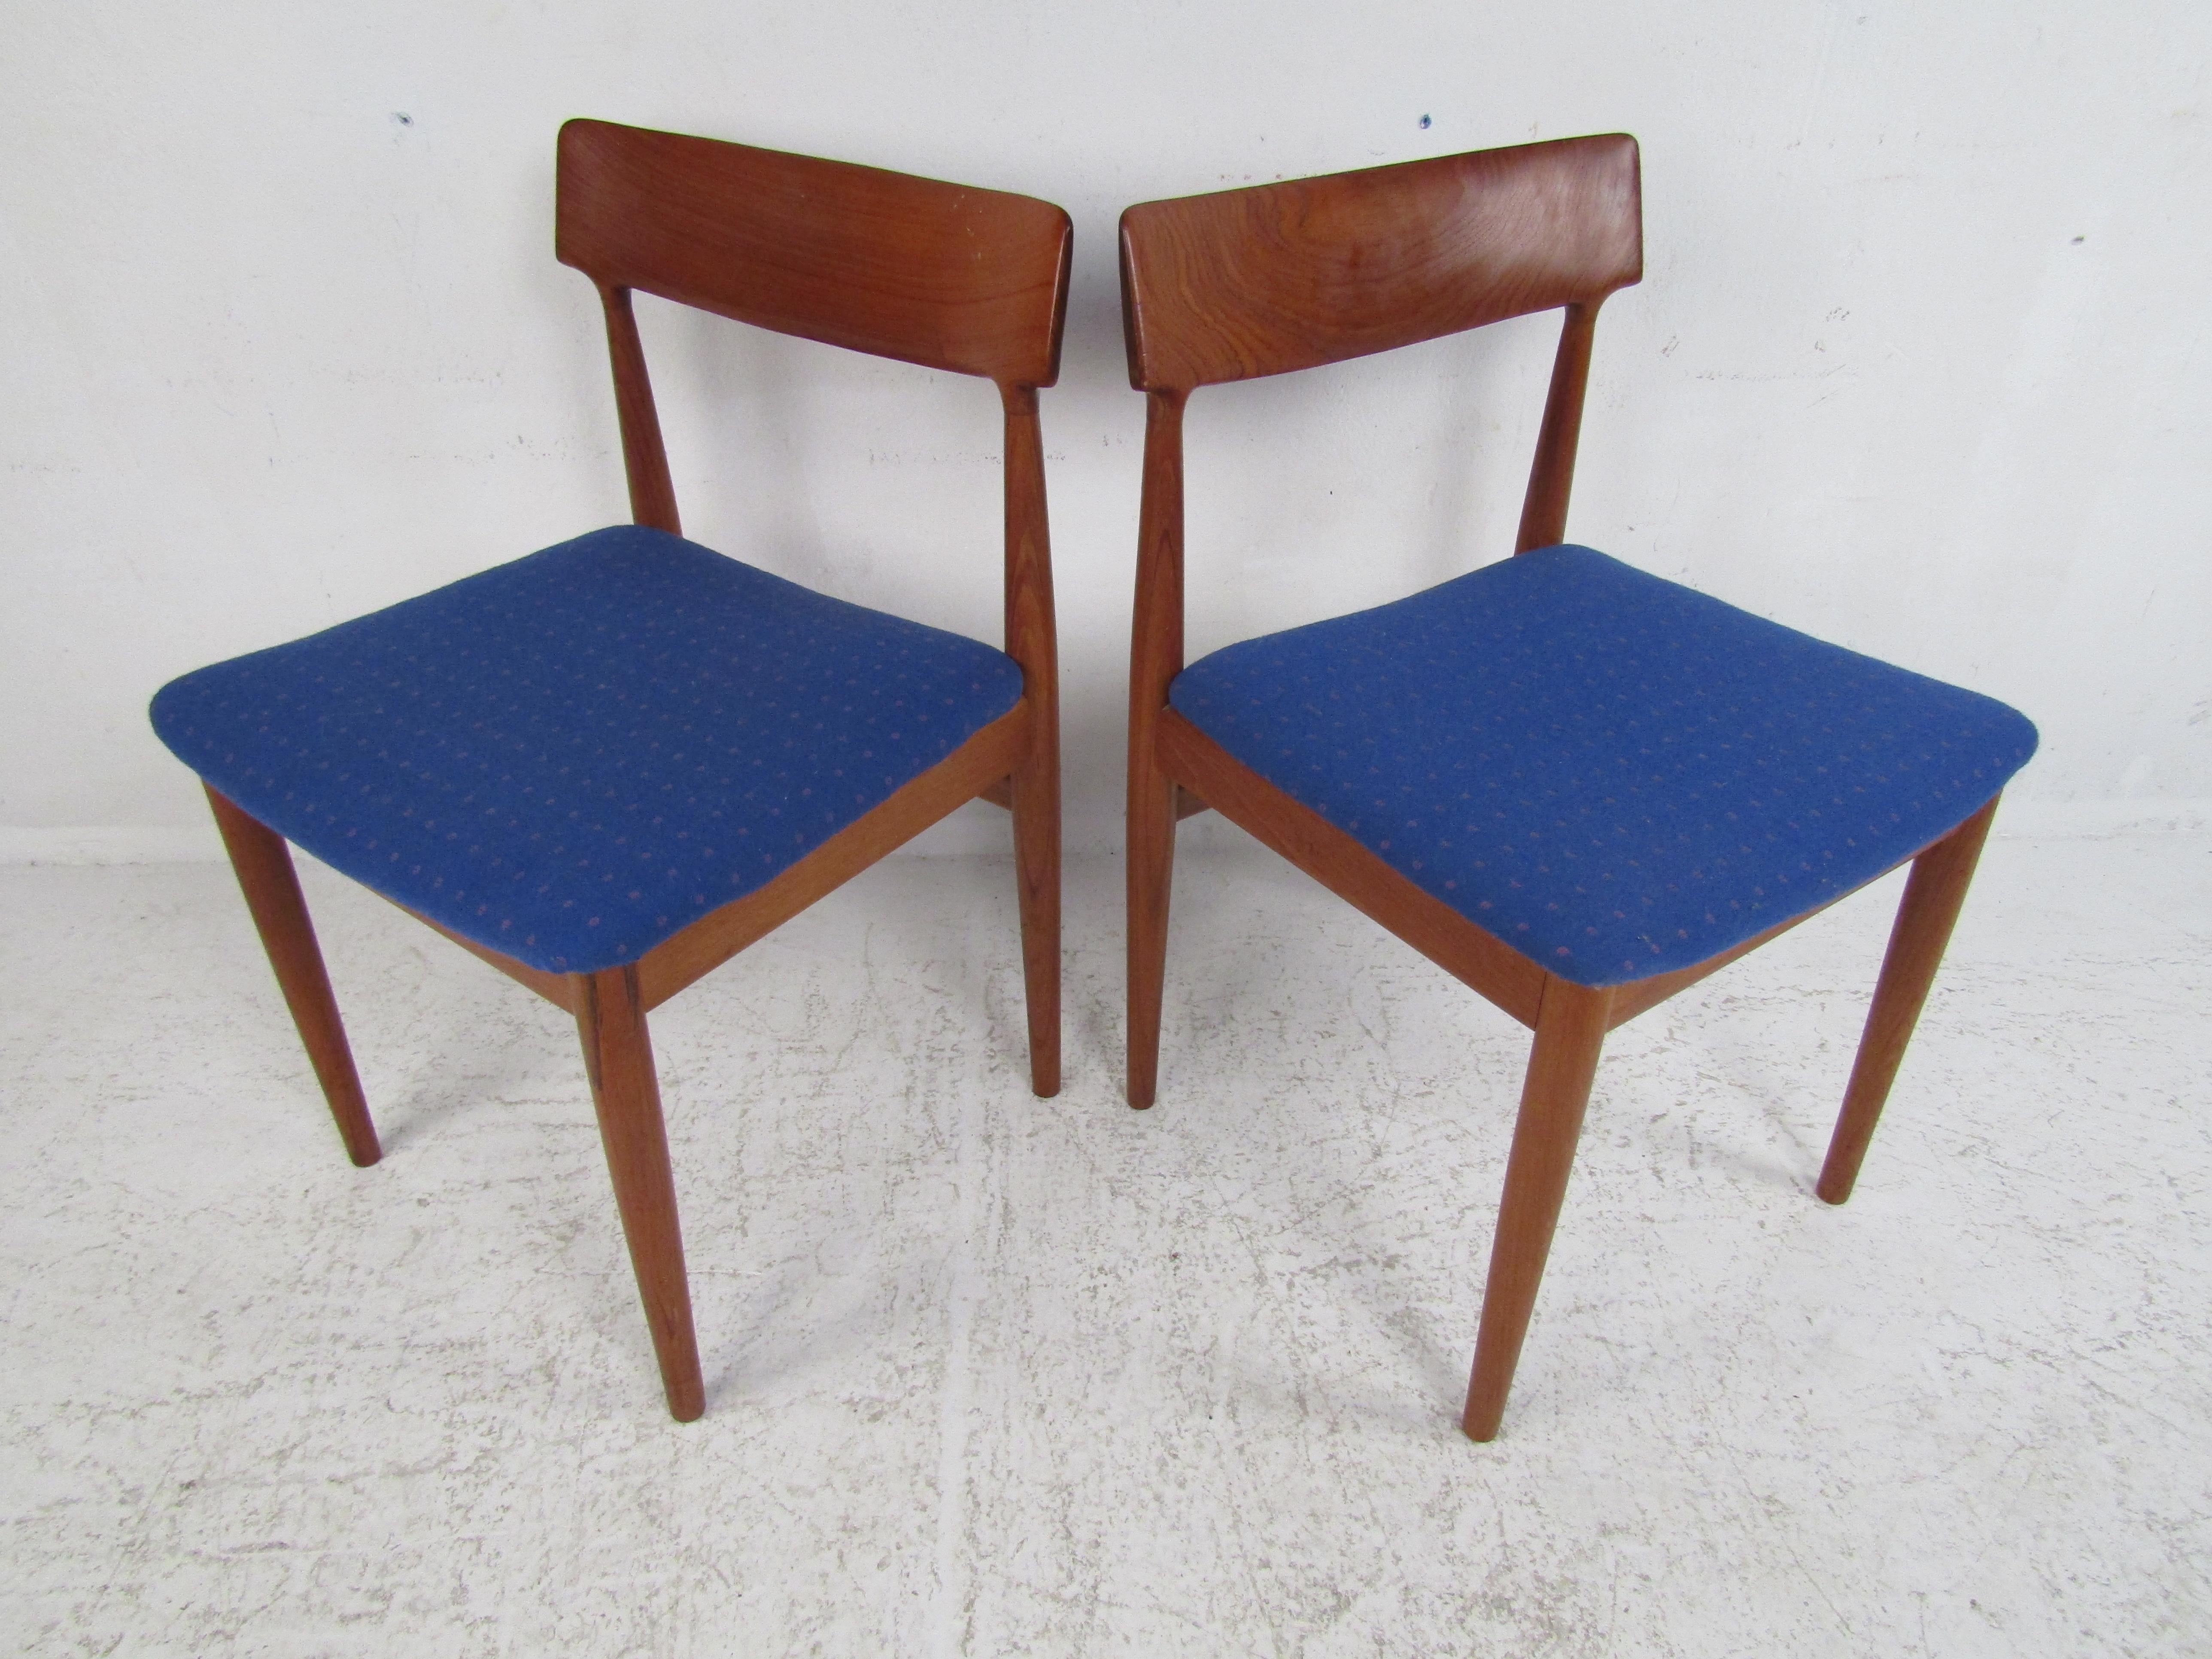 This stunning set of six vintage modern chairs are stamped, 